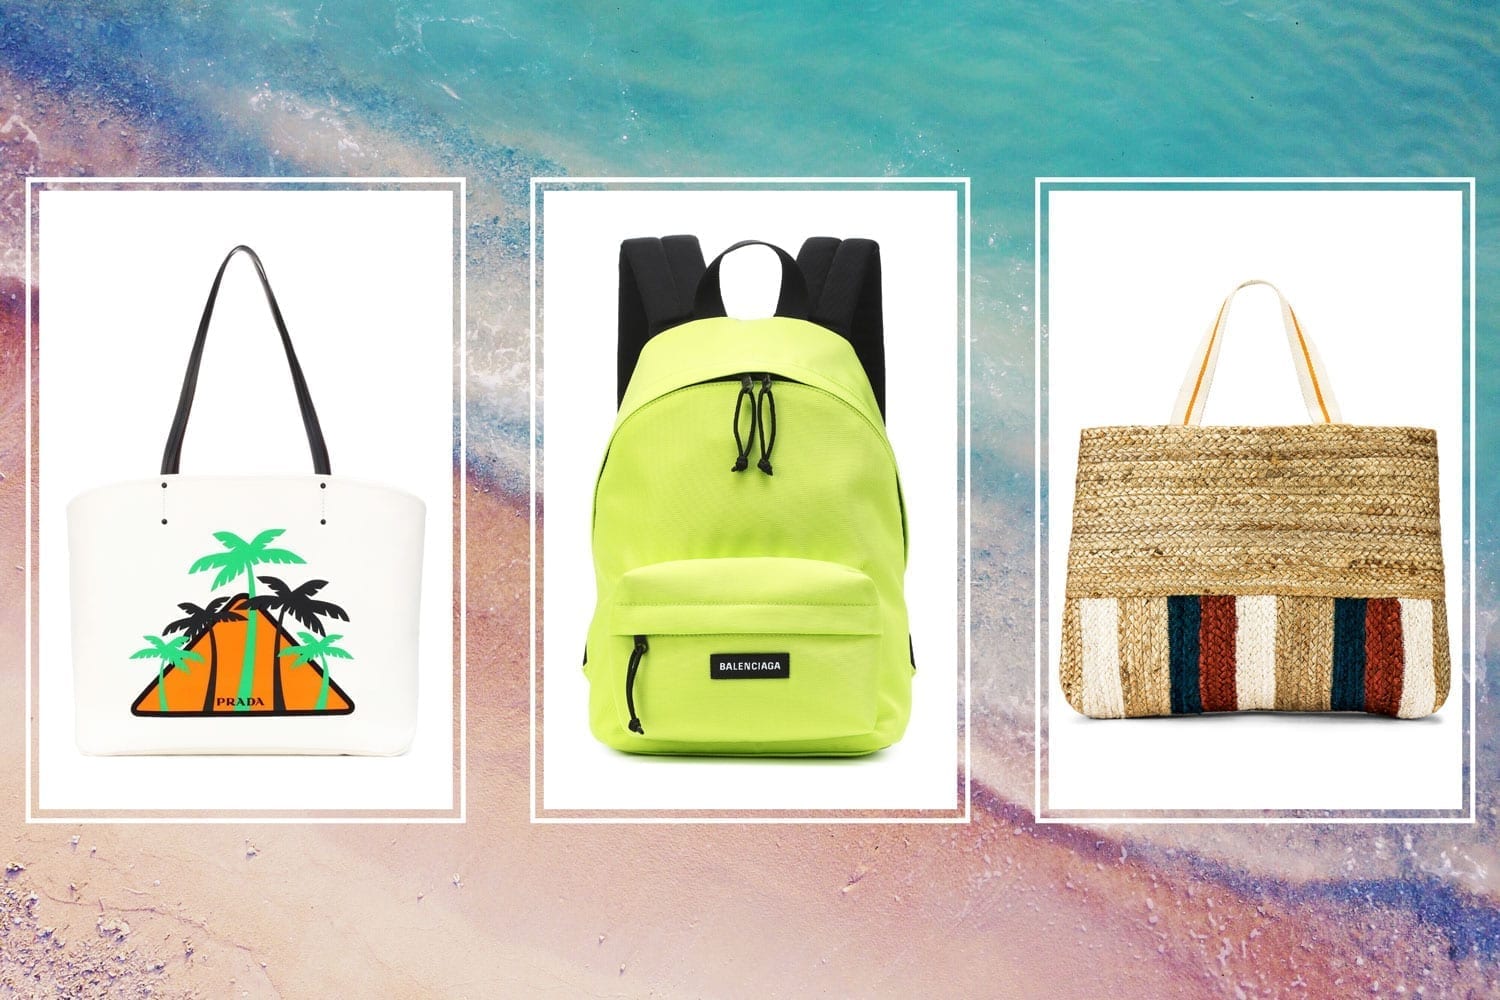 A triptych of three bags on a beach background.